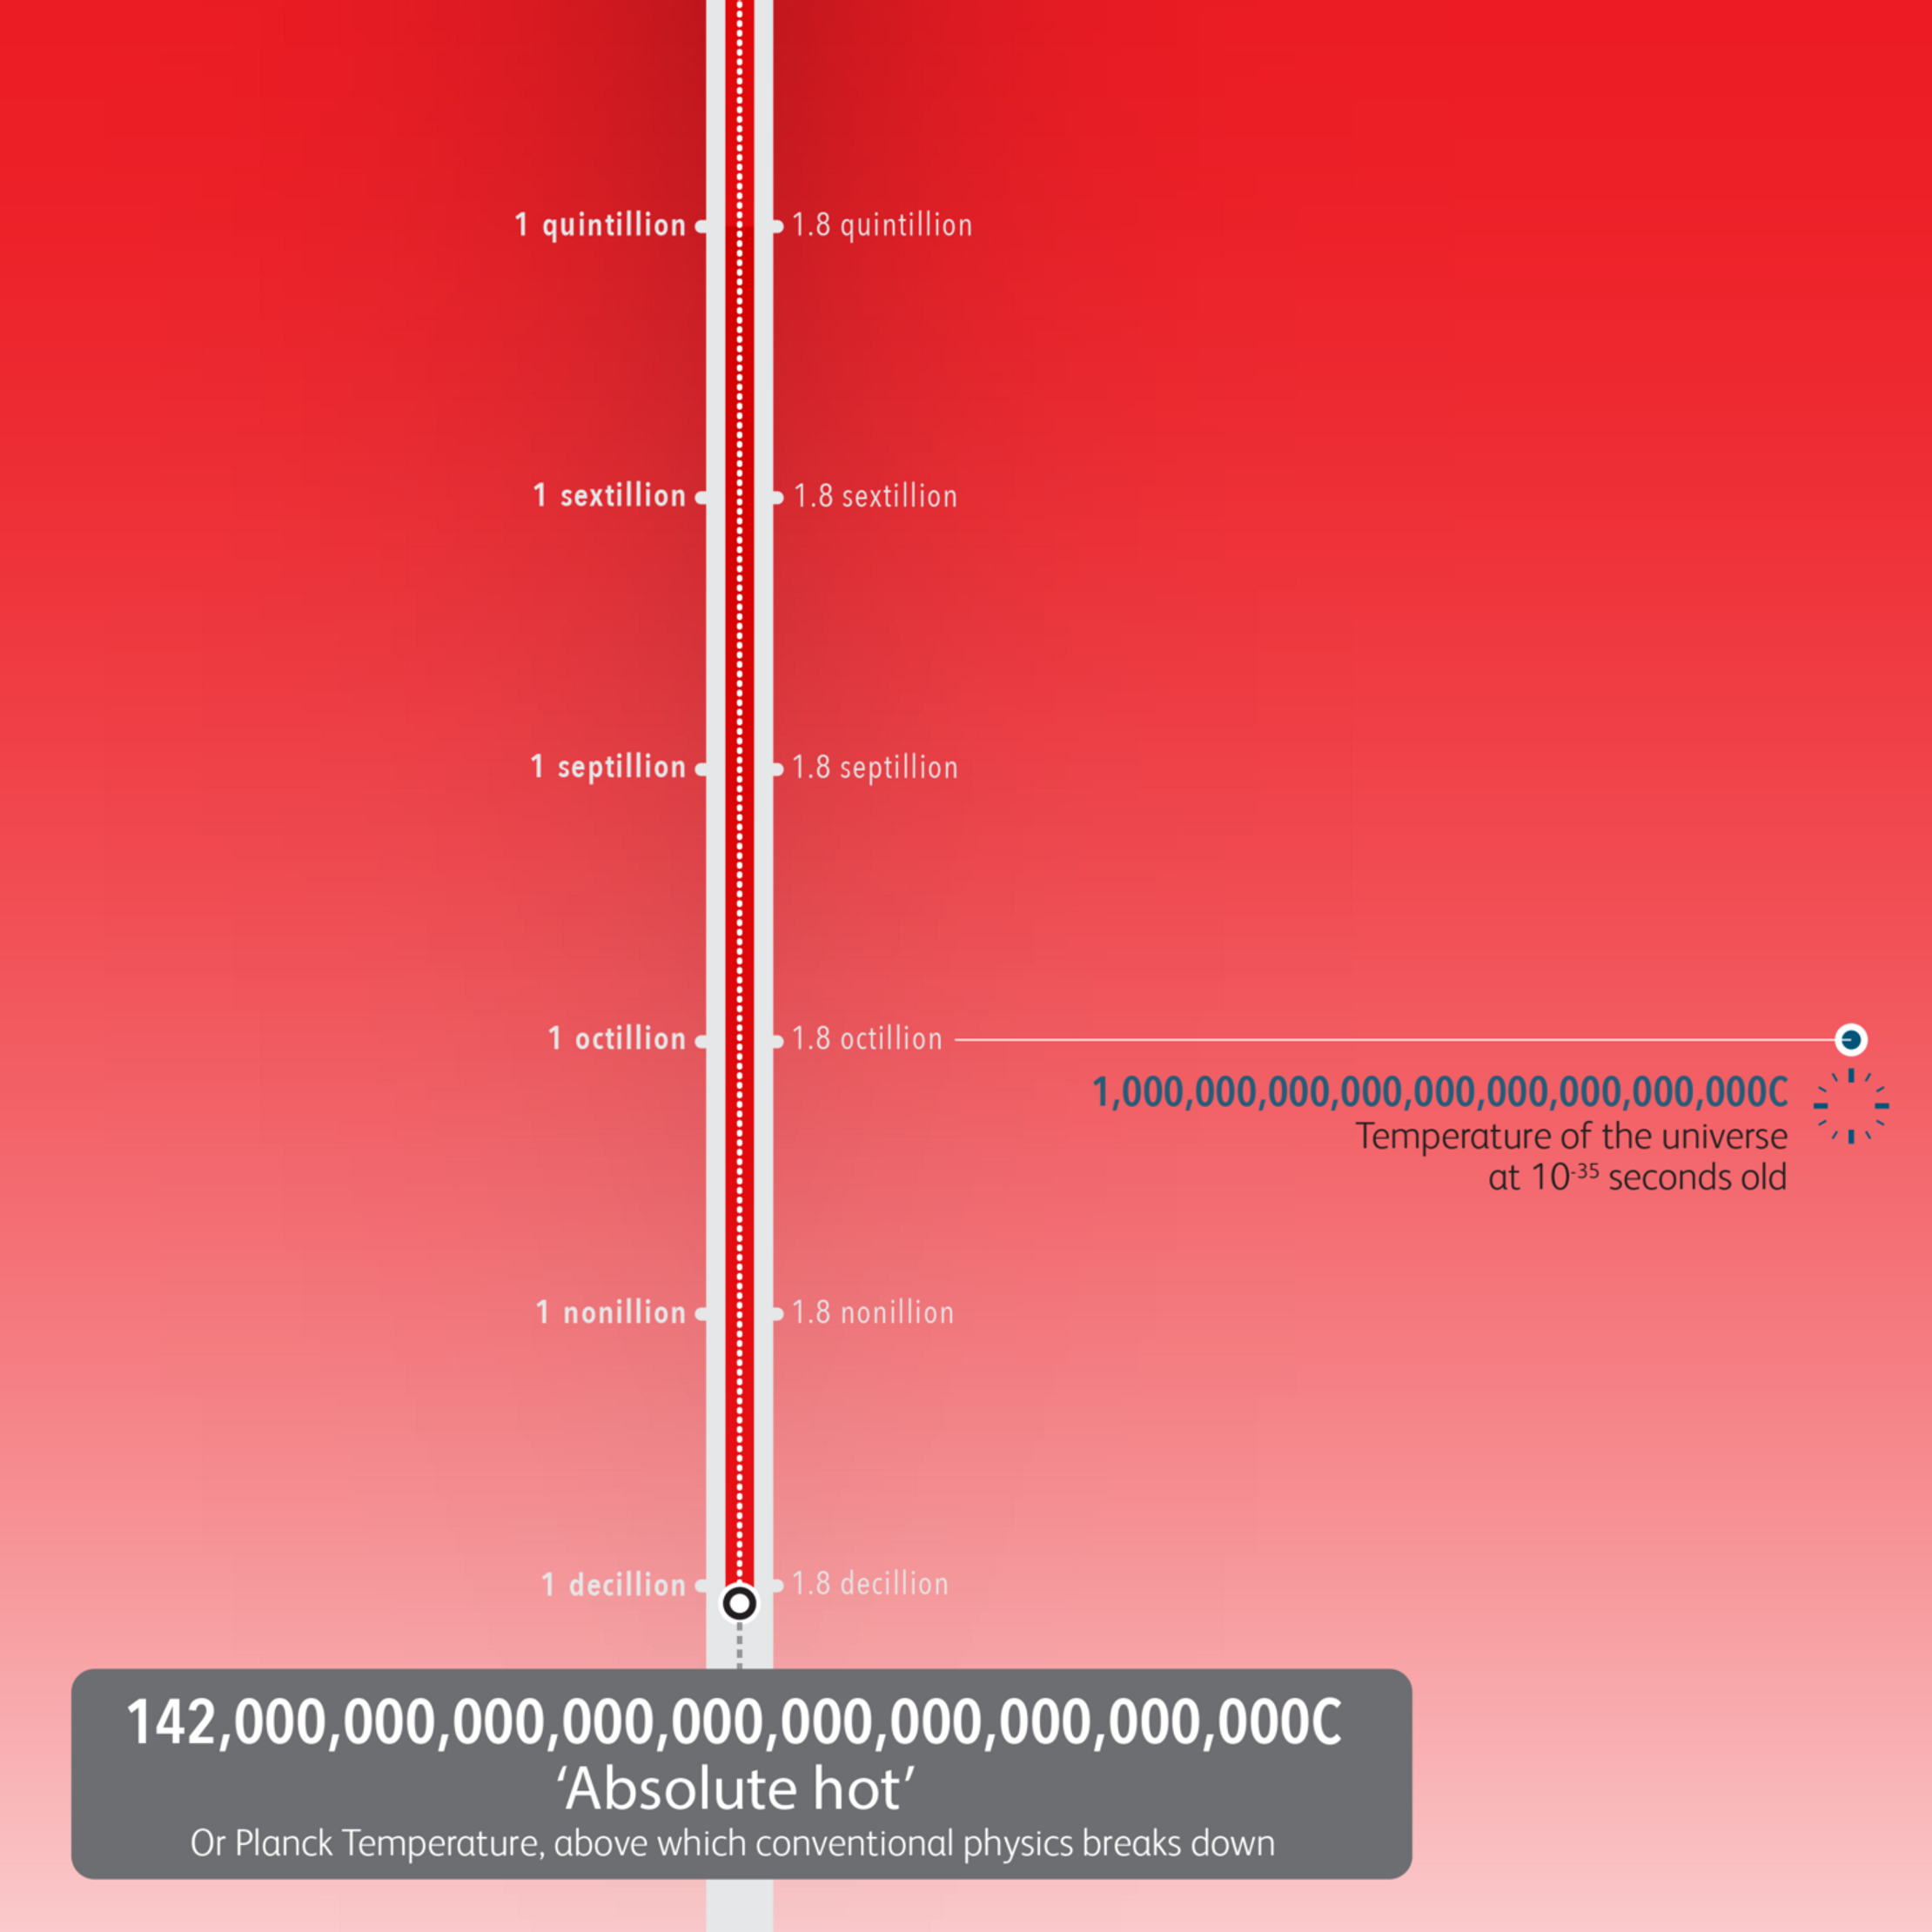 A screenshot of the extreme heat end of the Billion Degrees of Separation graphic. It shows 'Absolute hot' at 142 Nonillion (30 zeros) degrees Celcius.  